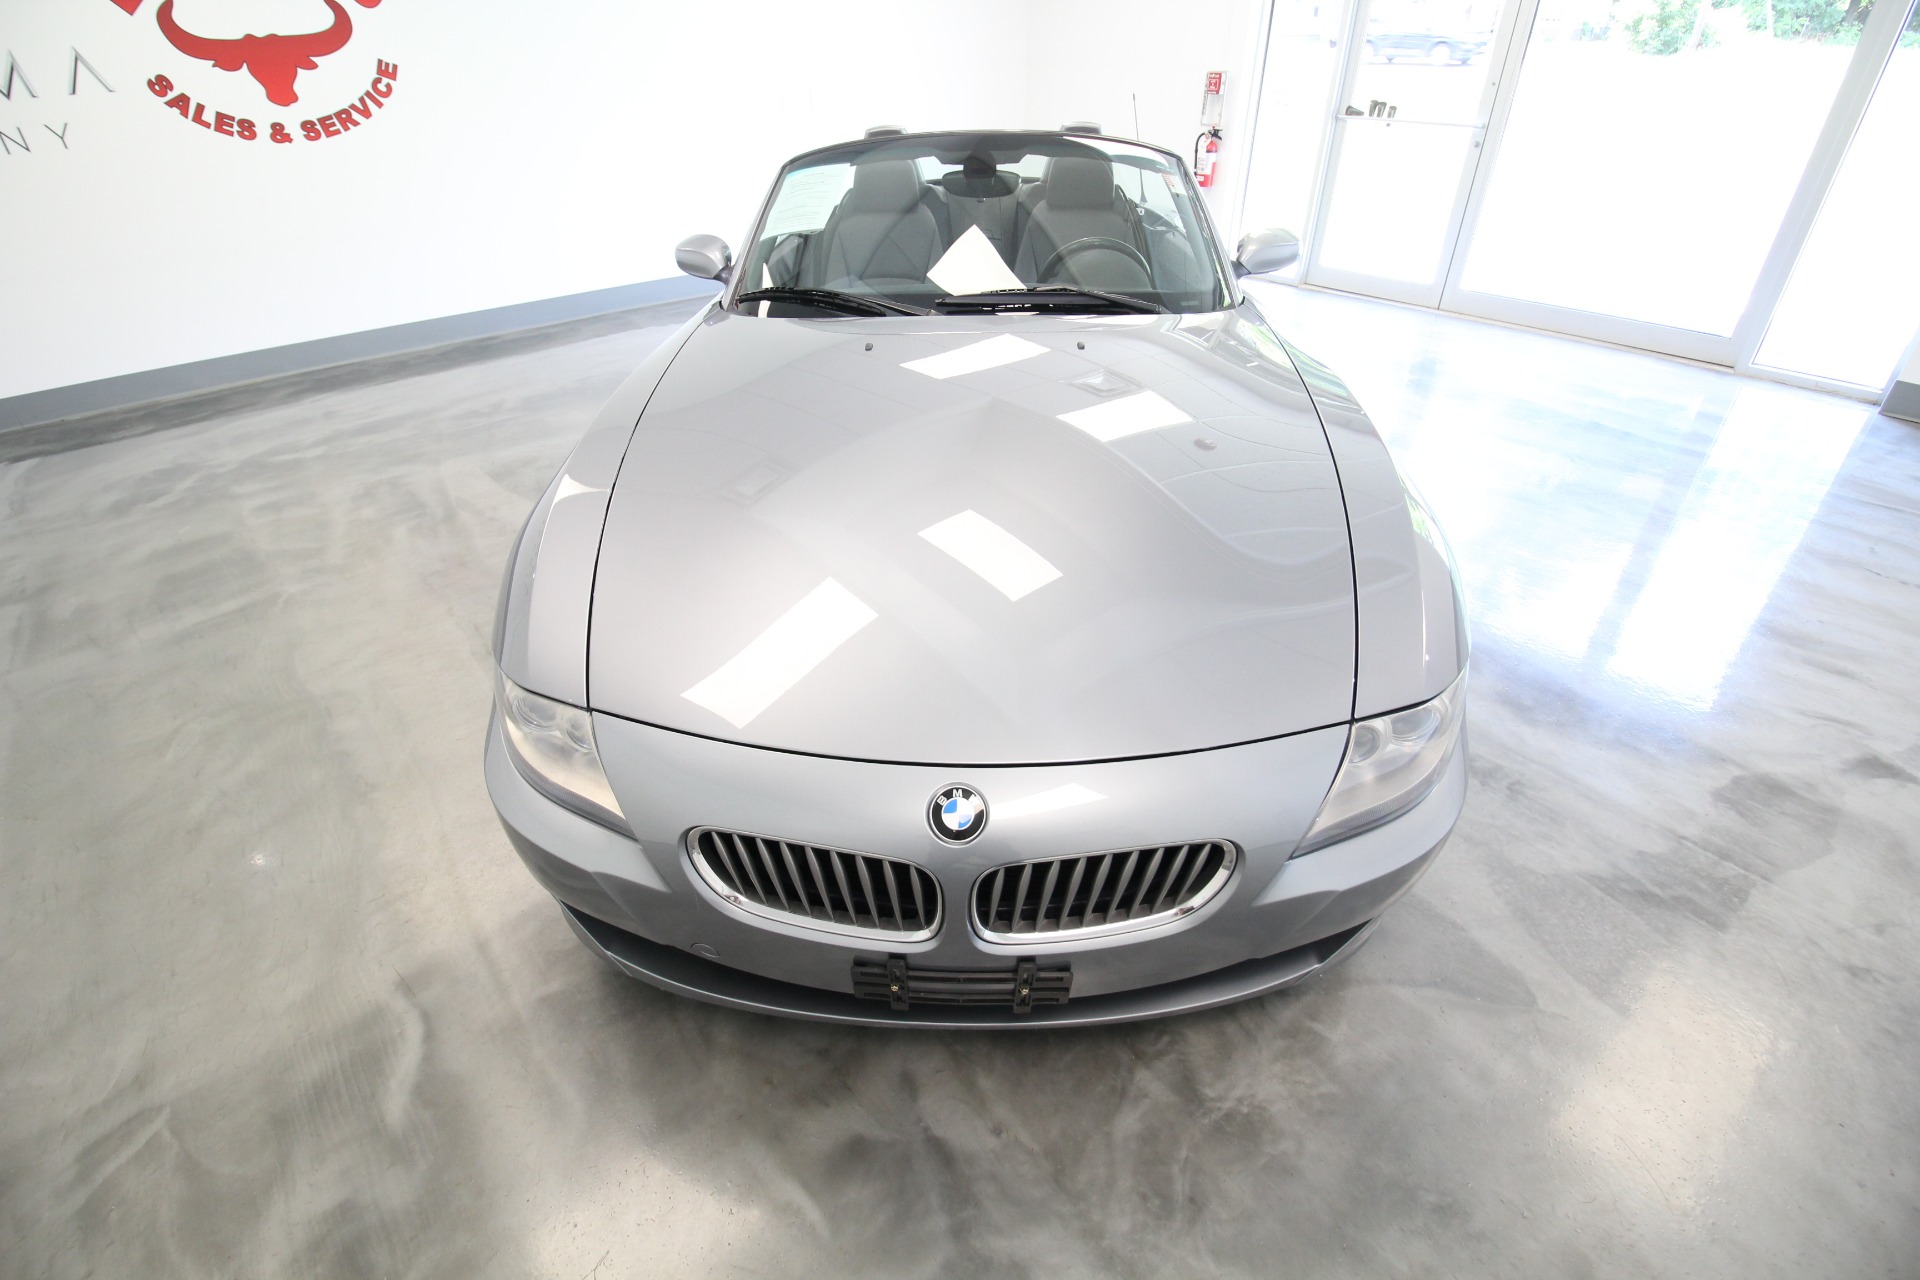 Used 2007 Silver Gray Metallic with Black Soft Top BMW Z4 Roadster 3.0si LOADED - CLEAN | Albany, NY